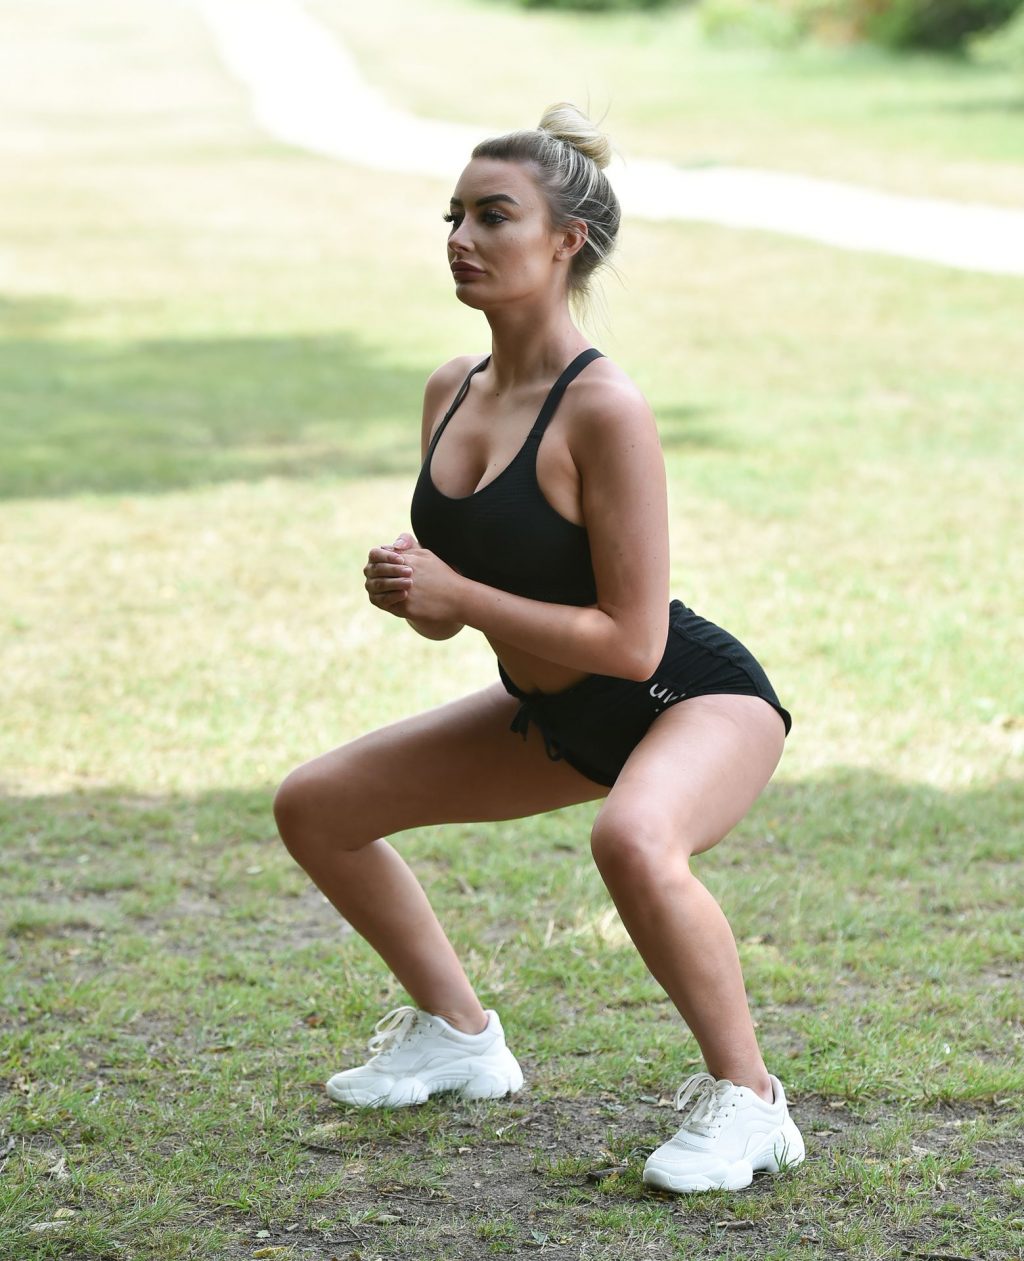 Chloe Crowhurst Is Seen Doing Her Sexy Morning Workout (25 Photos)